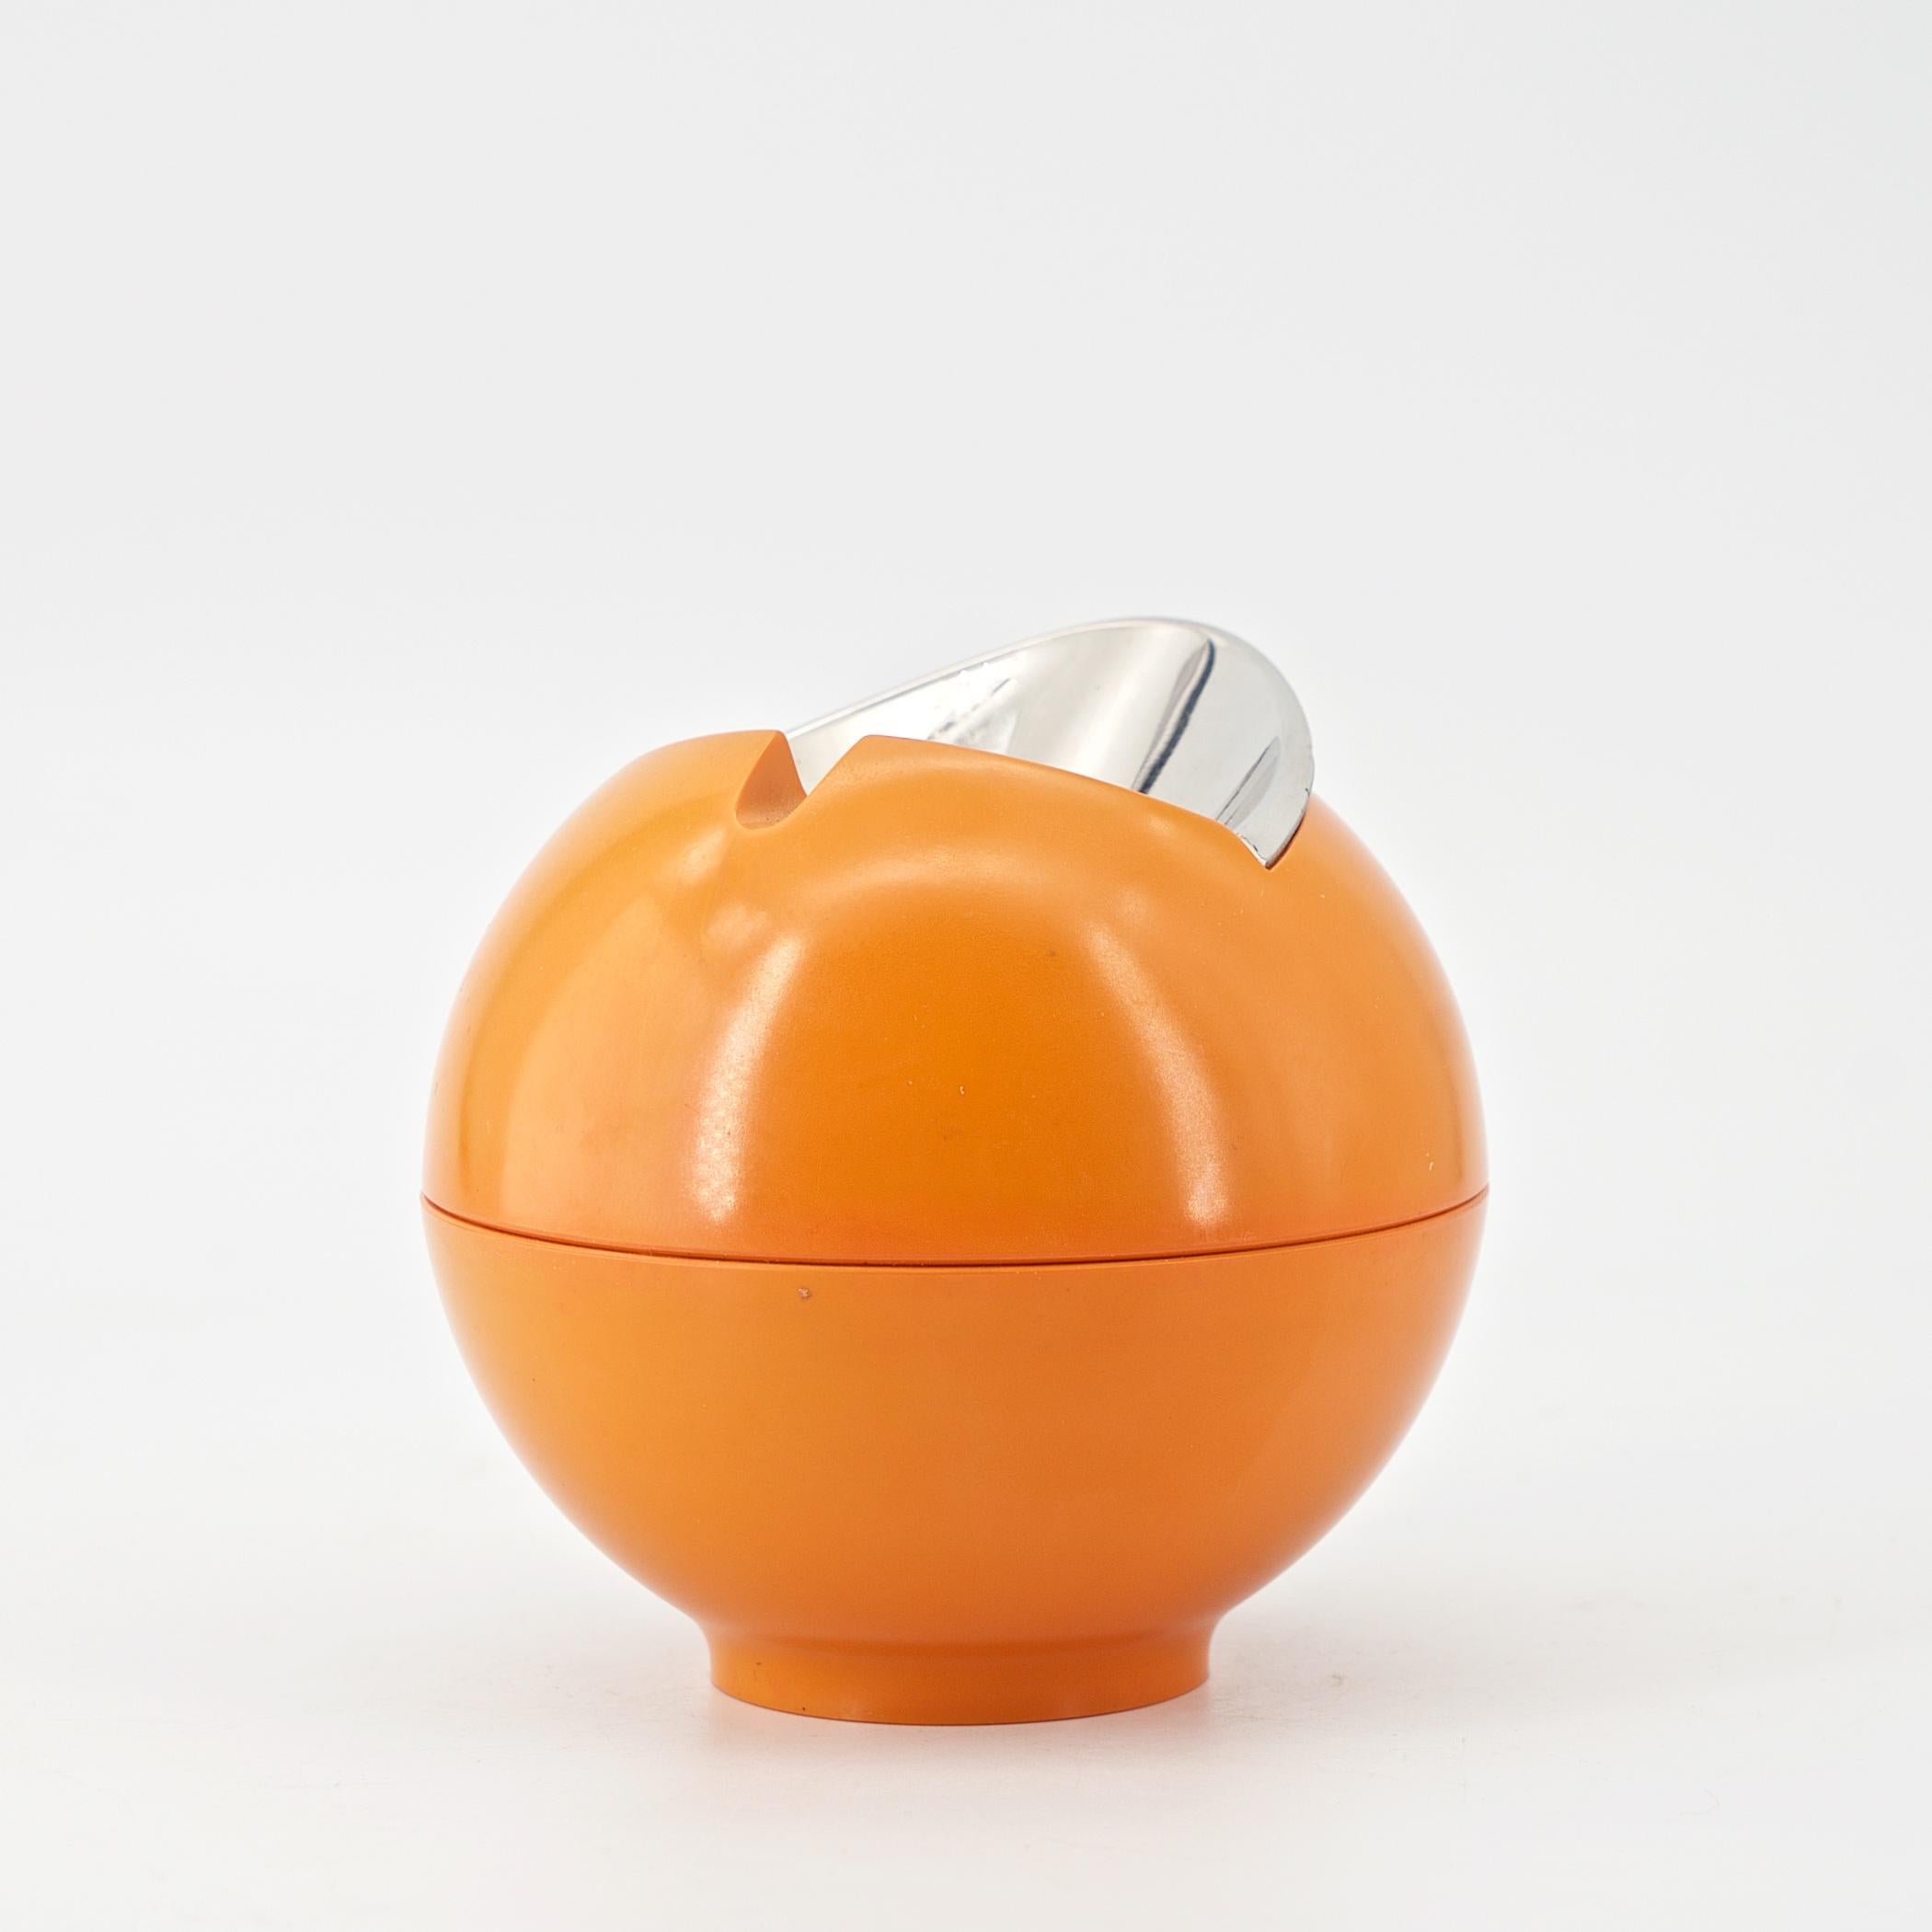 A wonderful sculptural orange orb ashtray from the 1960s German era of ABS Plastics manufacturing dominance. Harder to find and highly collectible decor. Just about 3 1/2 inches wide and tall.